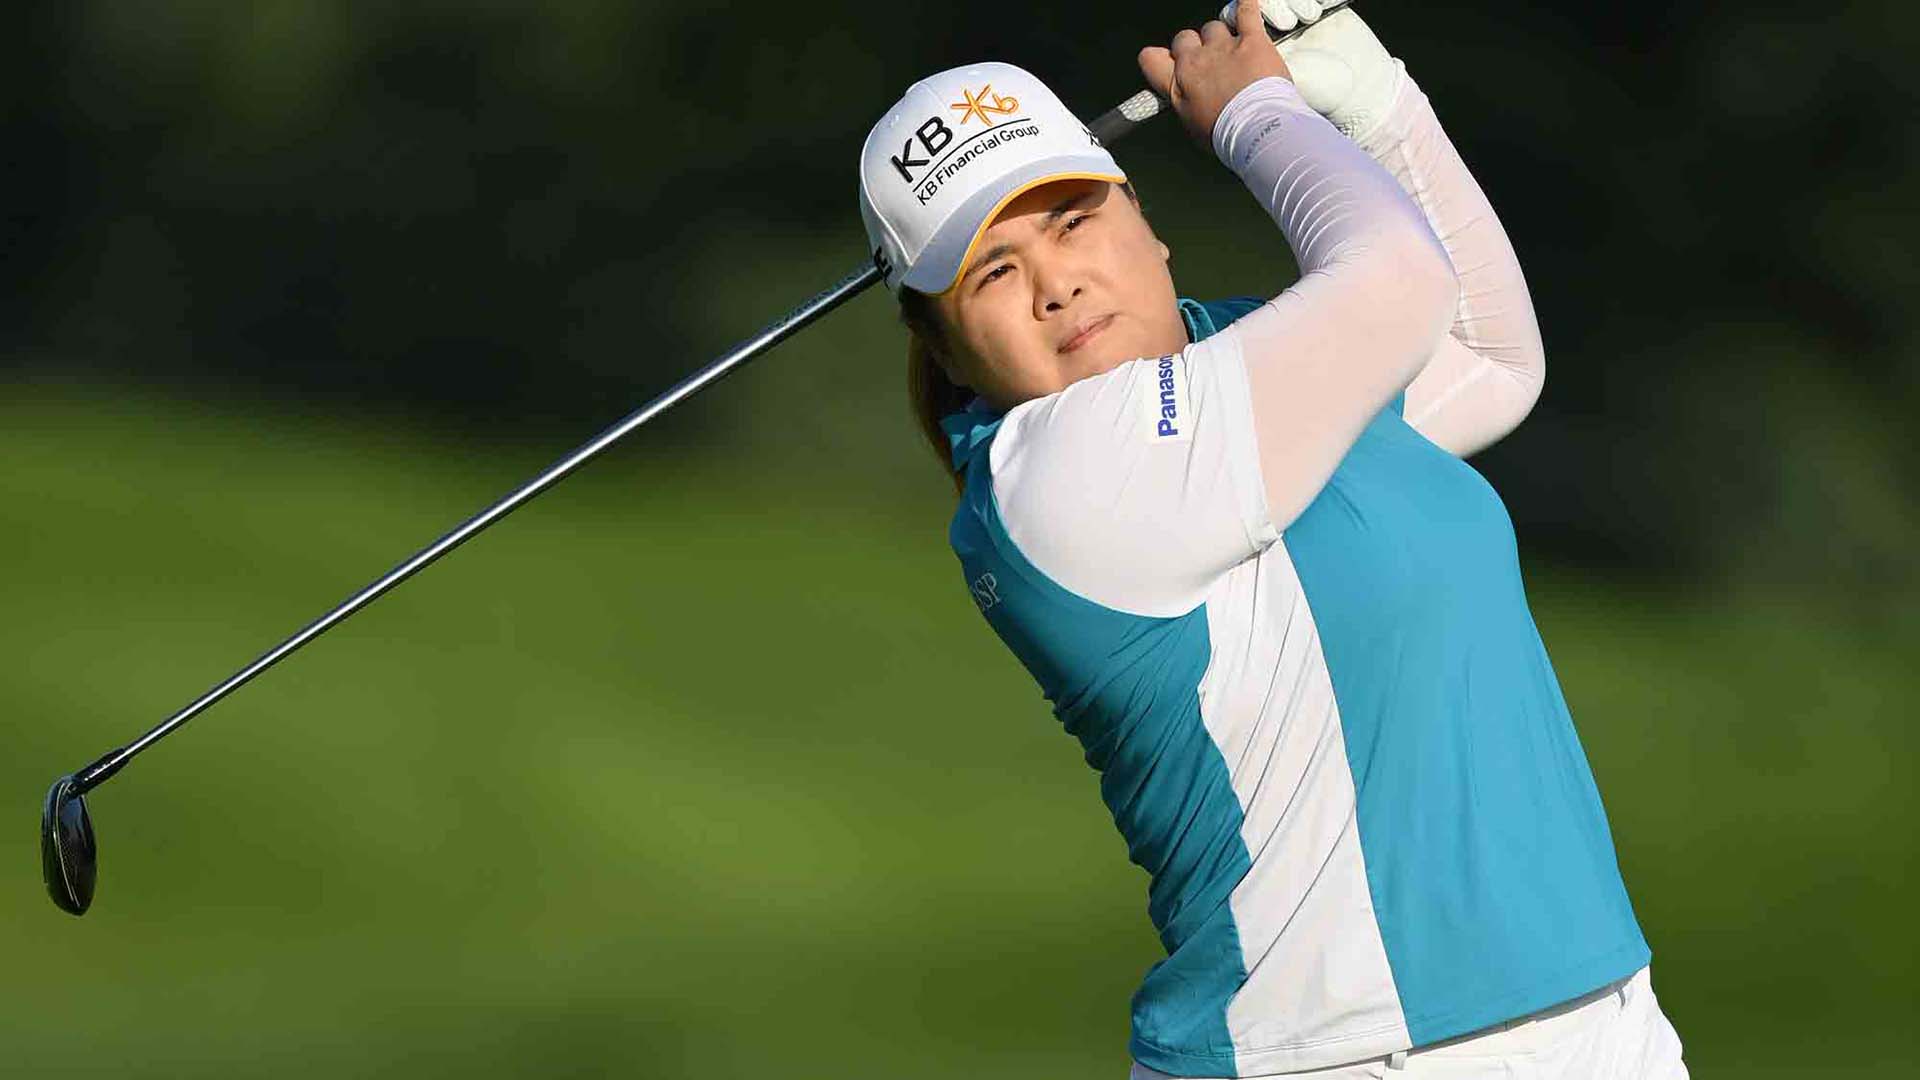 2021 Evian Championship: Inbee Park itching to become first to complete modern women’s Grand Slam